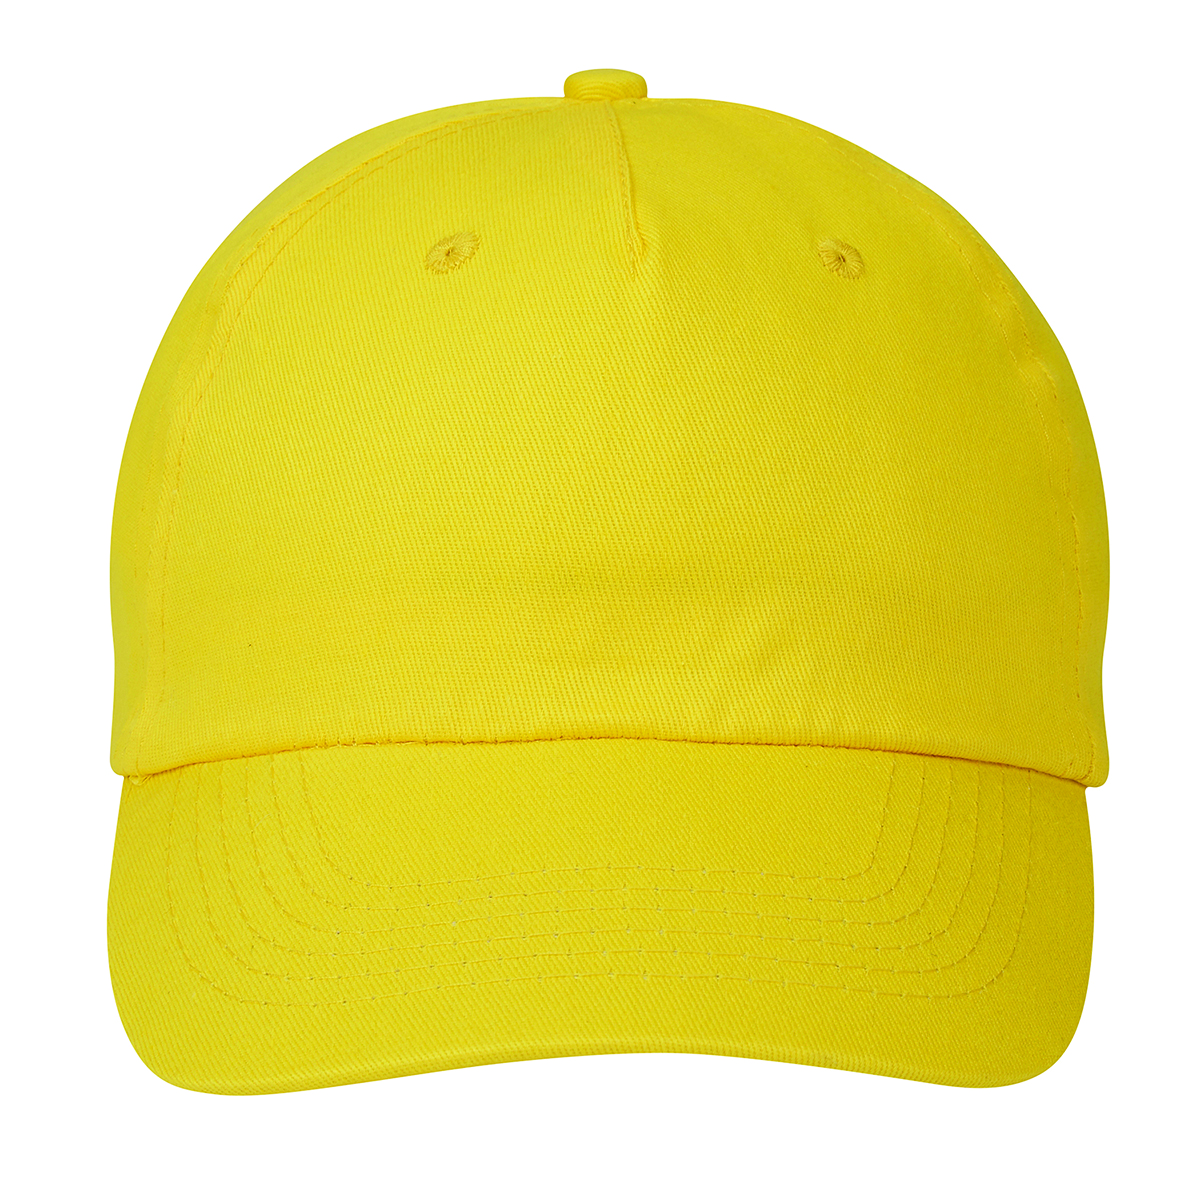 Athletic Gold Price Buster Hat